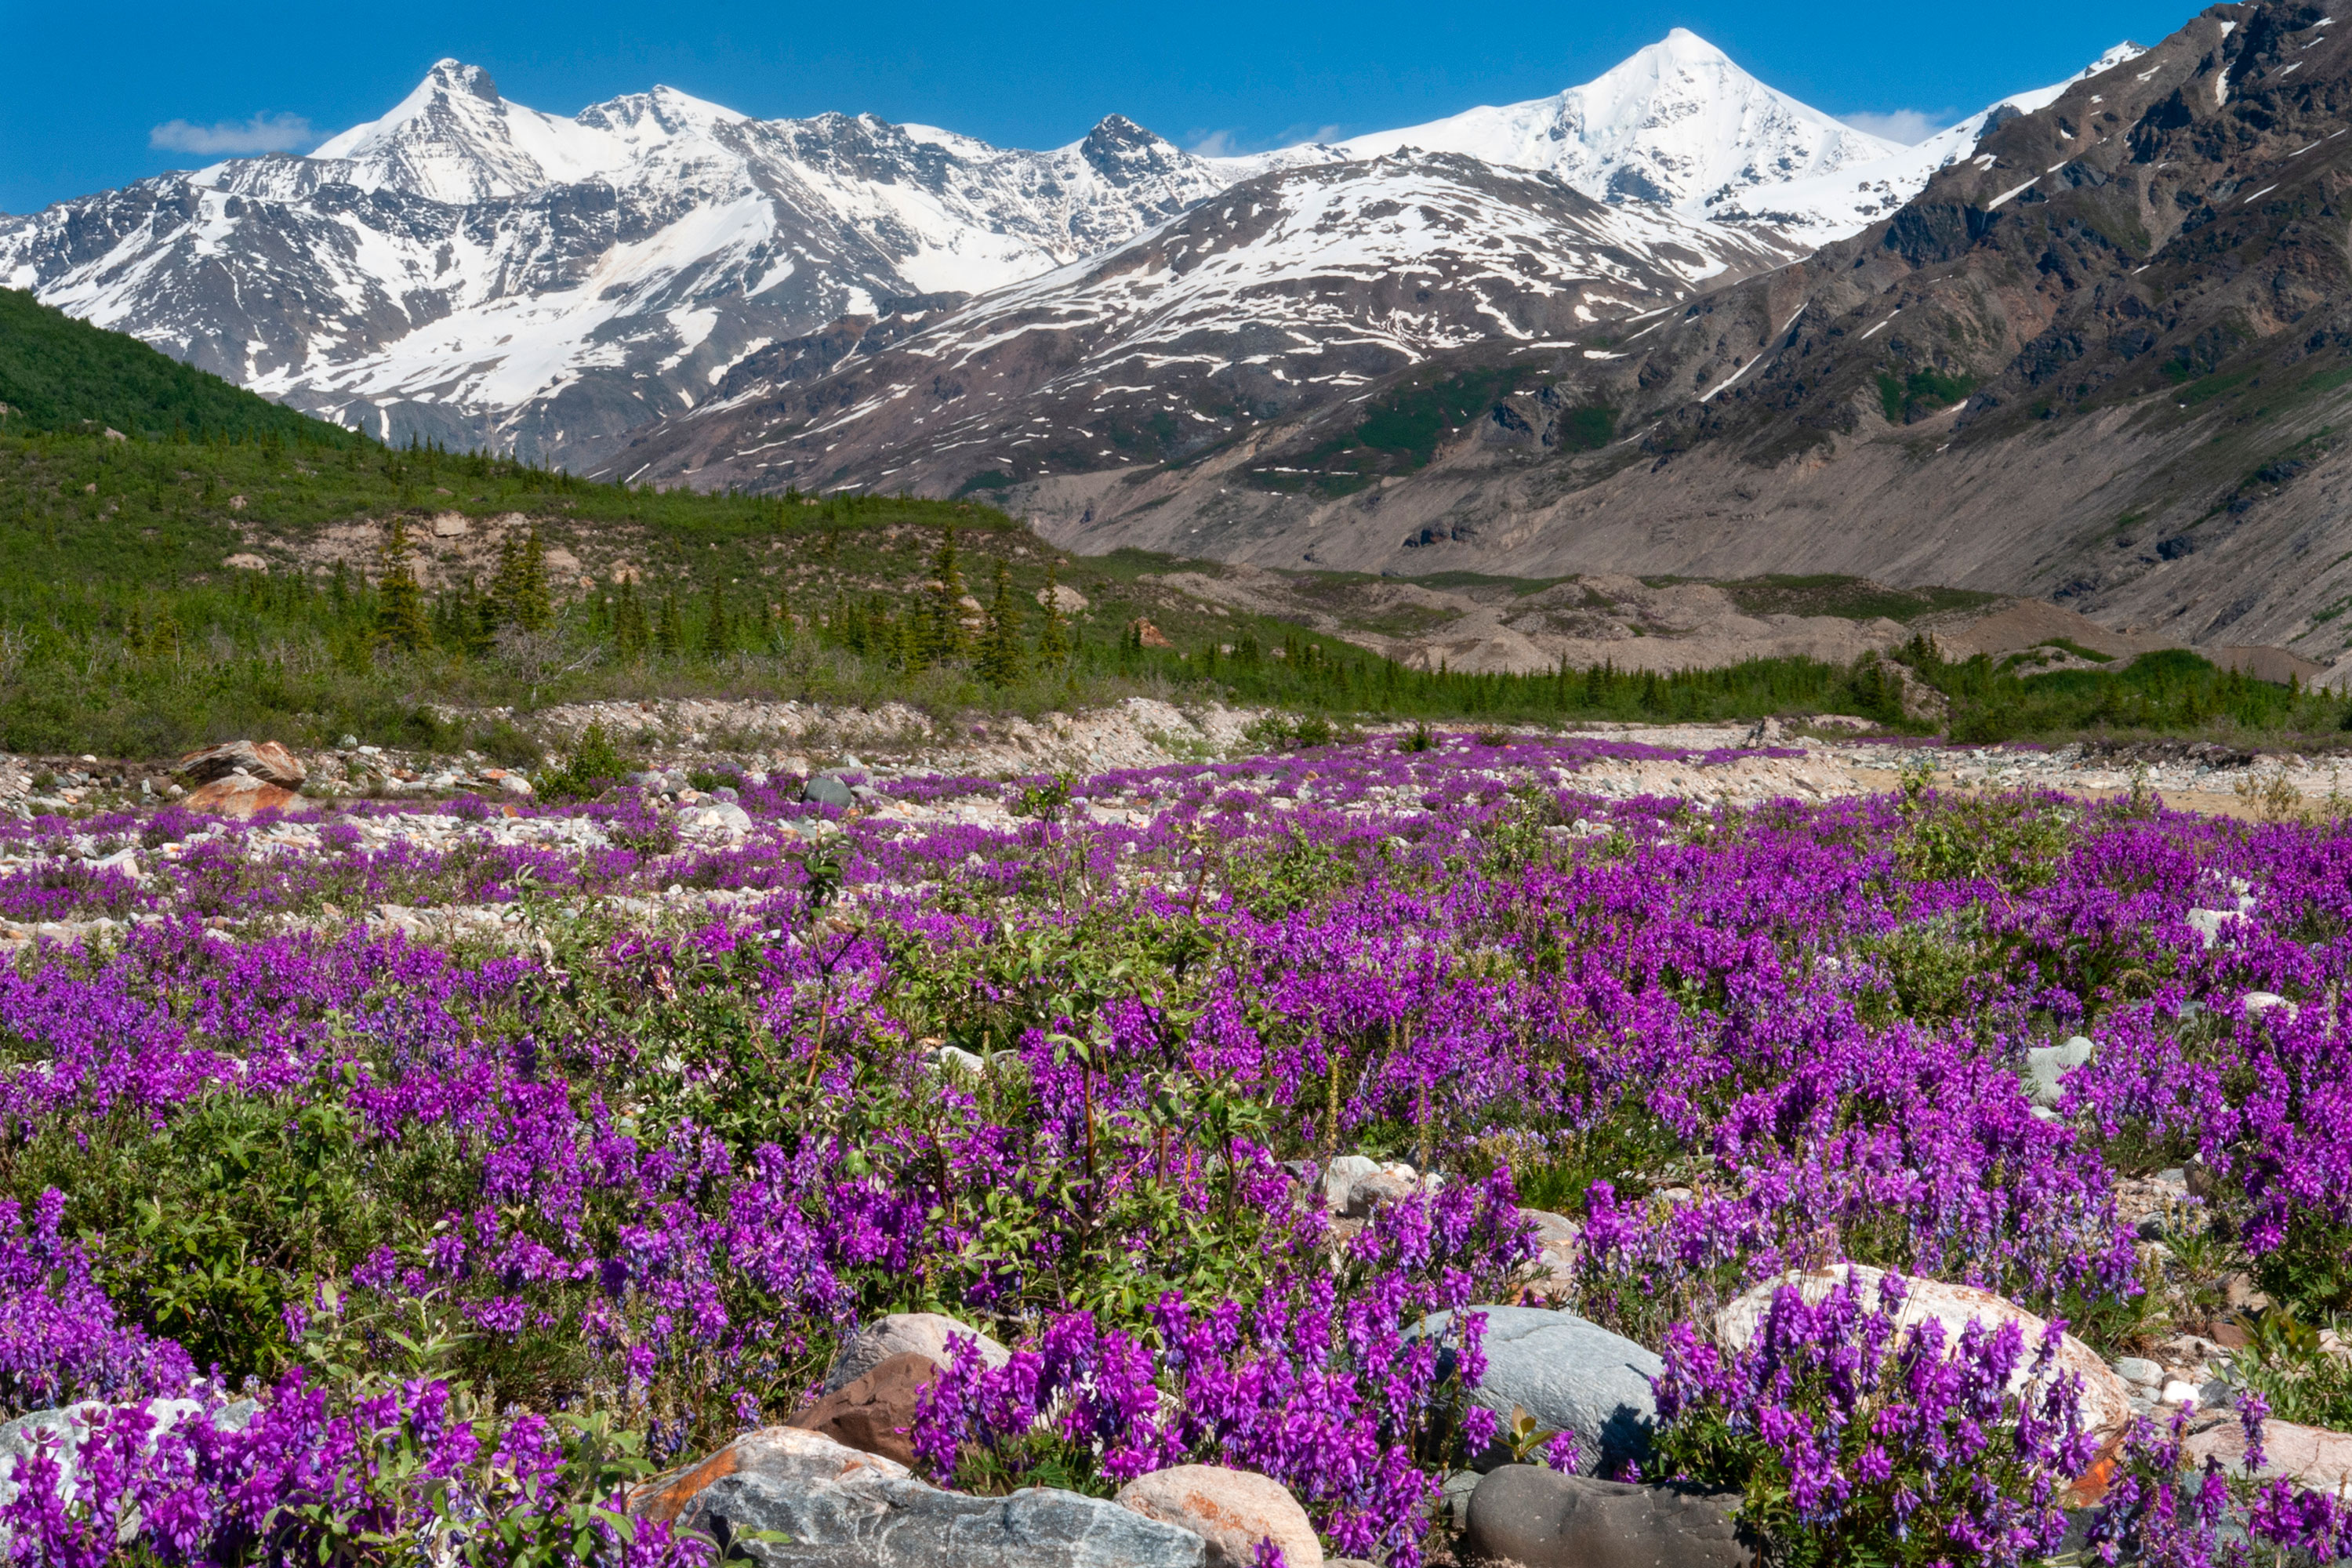 A glacial moraine with purple flowers in the foreground and mountains in the background.